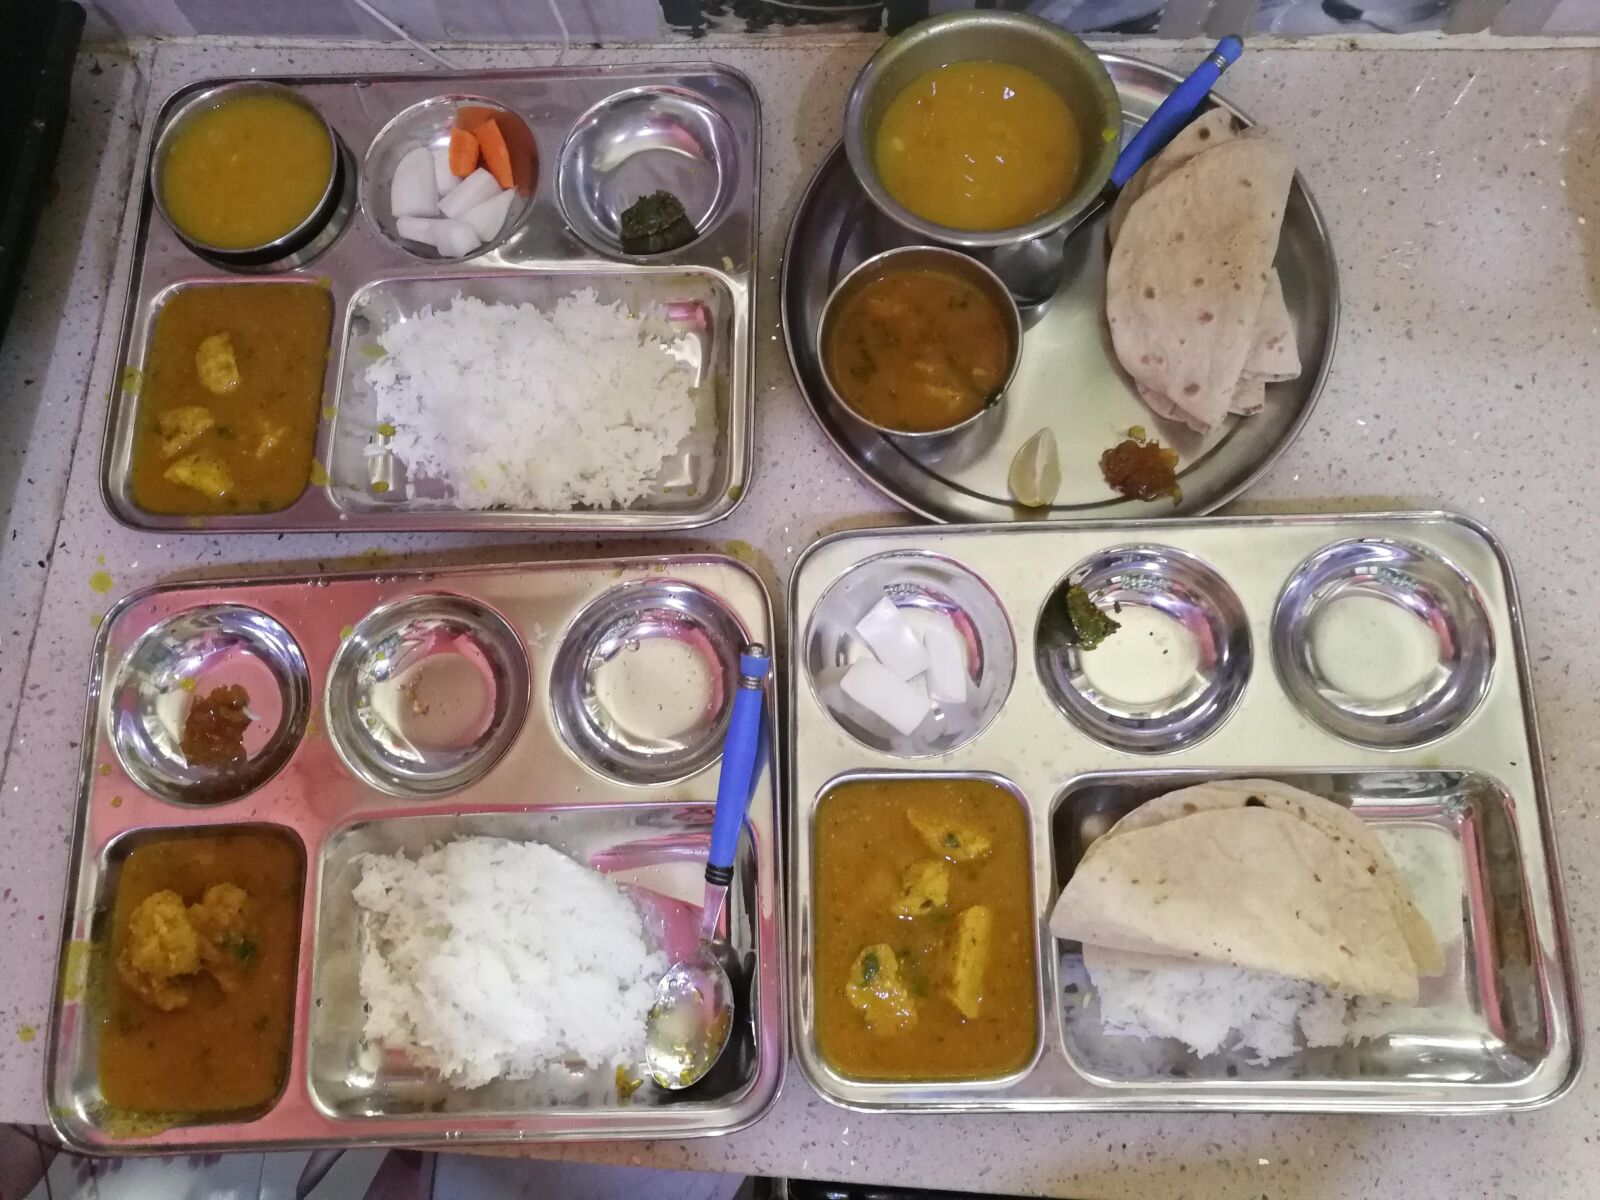 HUAWEI Honor 8 Pro sample photo. Thali, indian meal, meal photography